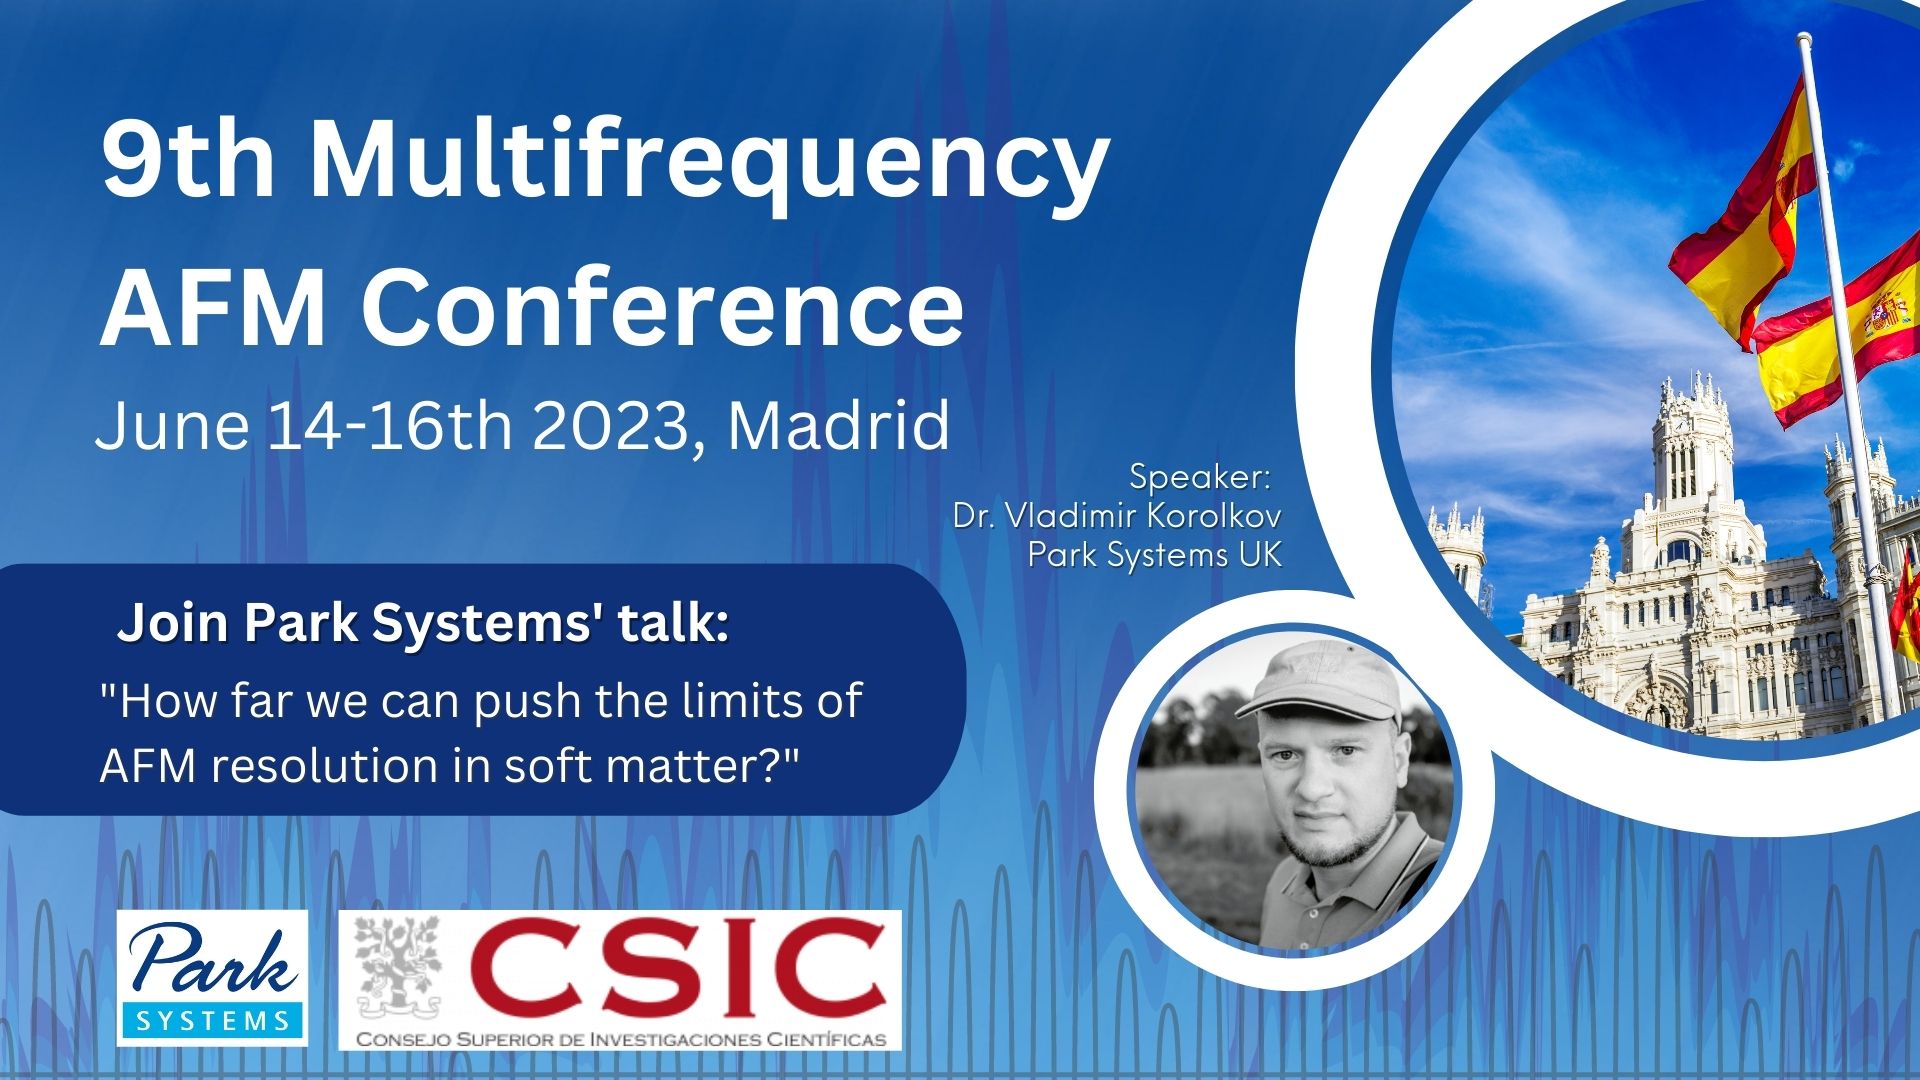 9th Multifrequency AFM Conference Madrid, Spain